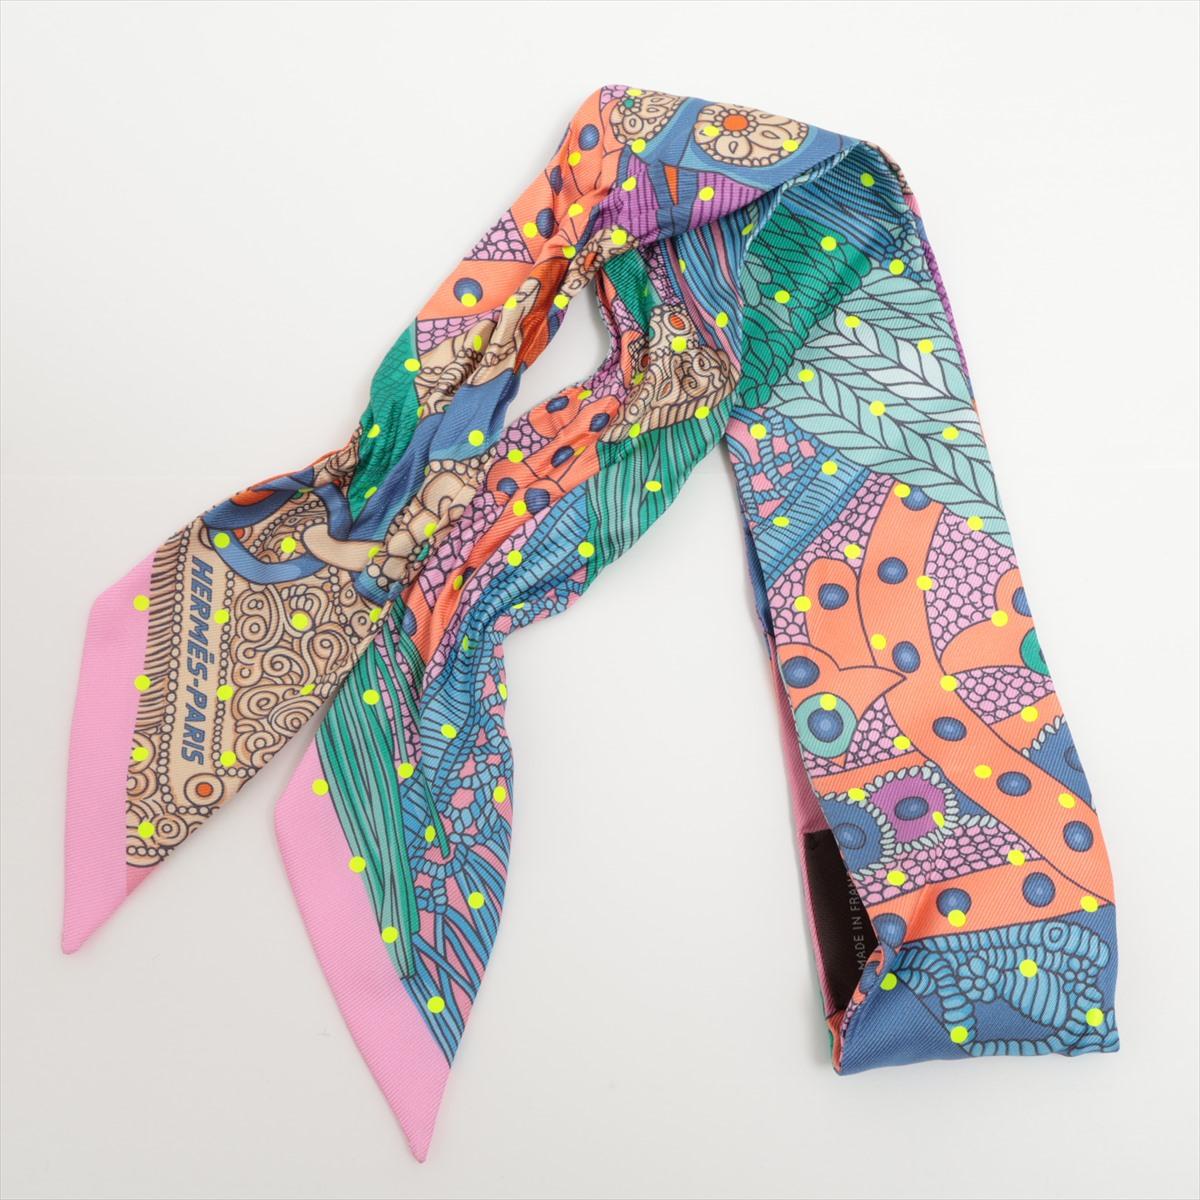 The Hermès Selle de Dignitaire Plumetis Twilly is a delightful and versatile accessory that adds a touch of elegance to any outfit. Crafted from luxurious silk twill, the Twilly scarf features a charming Selle de Dignitaire design, showcasing